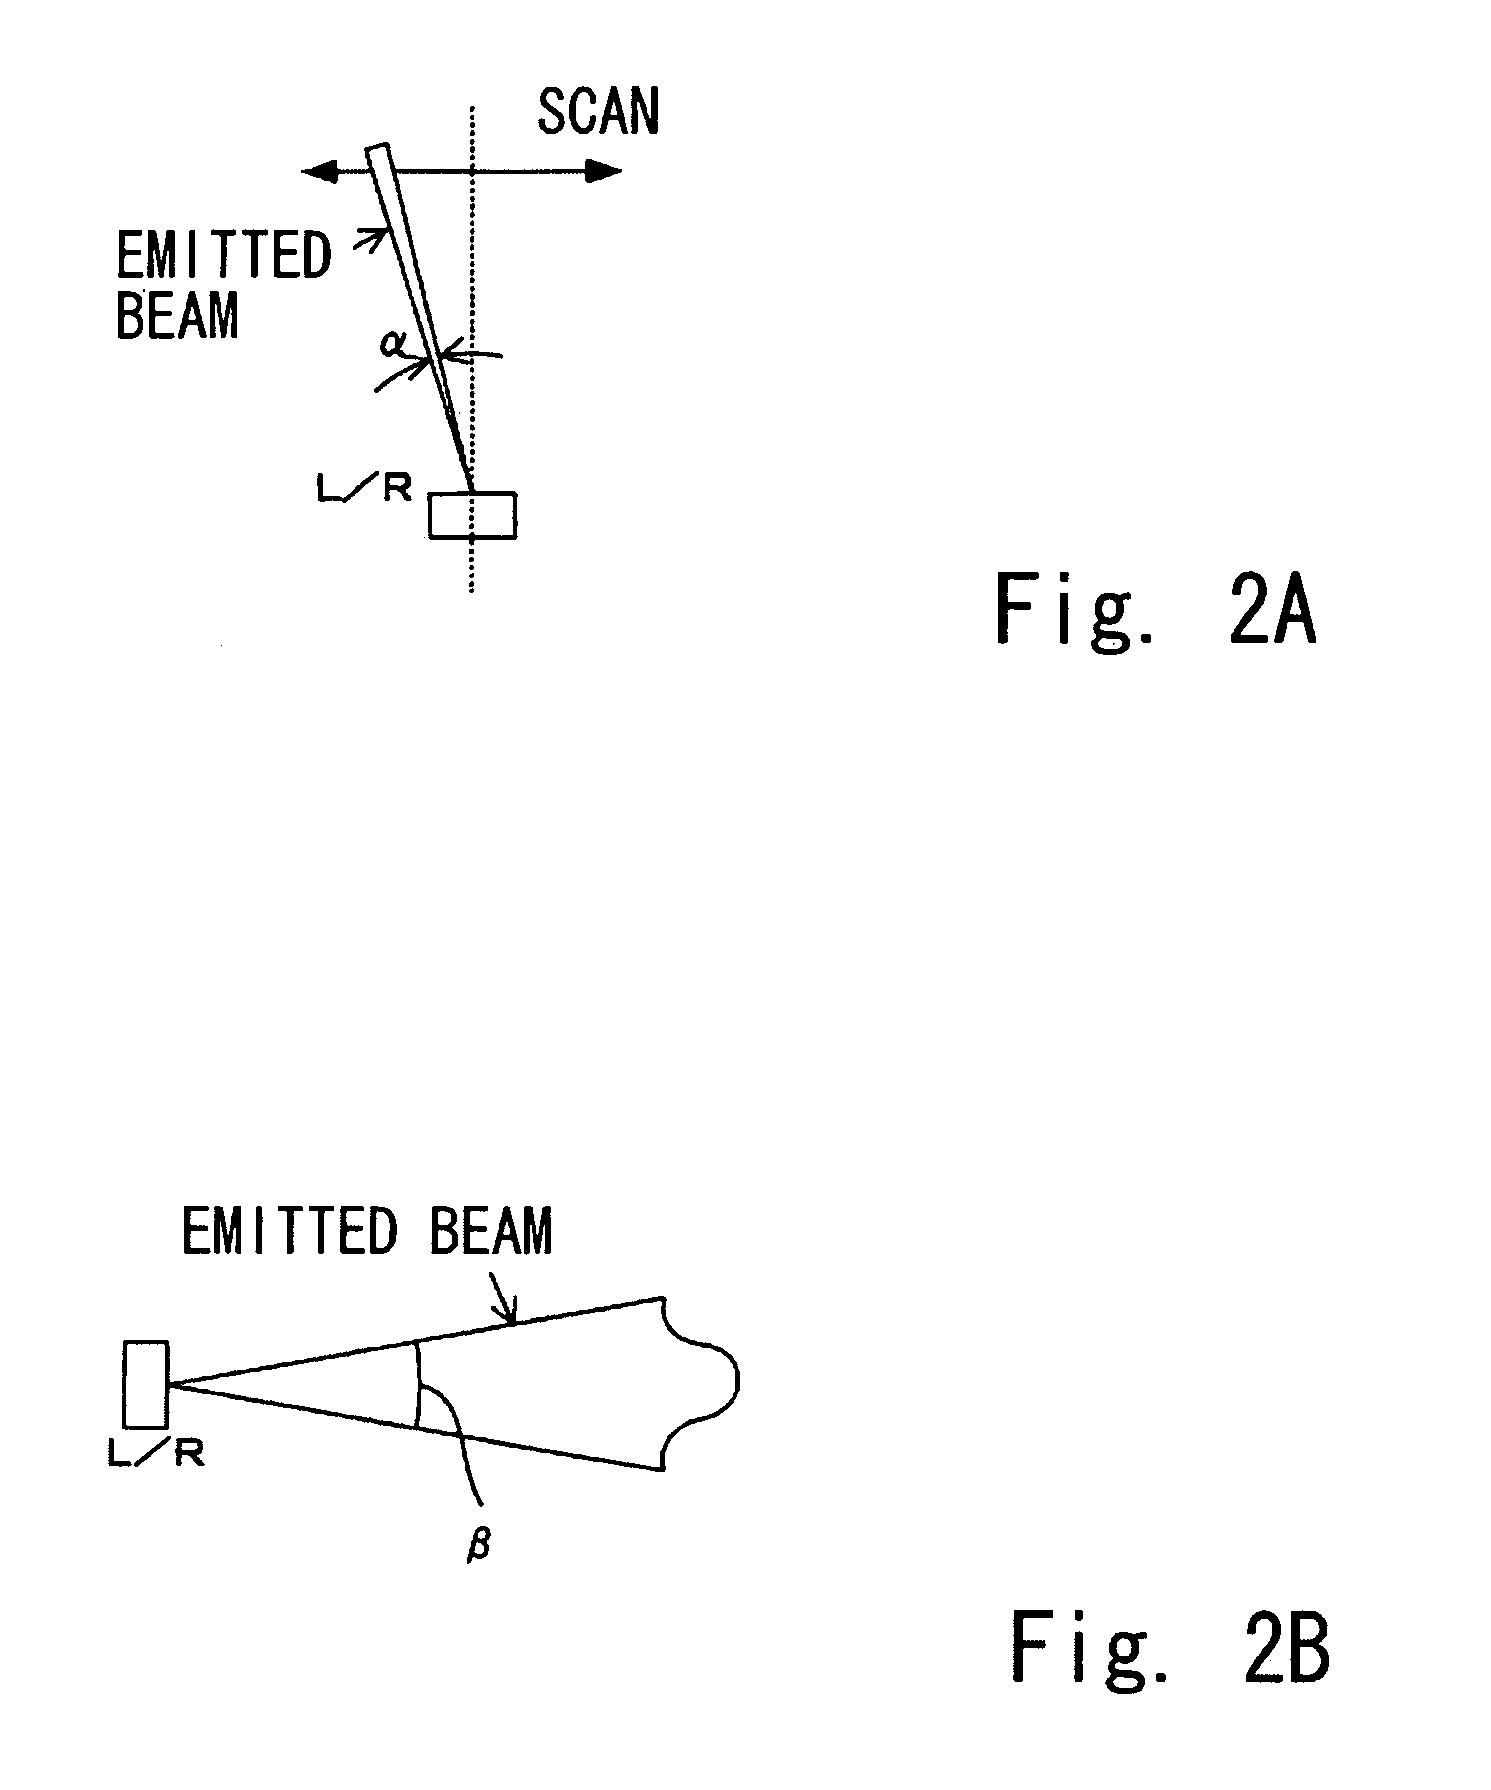 Image processing system for mounting to a vehicle